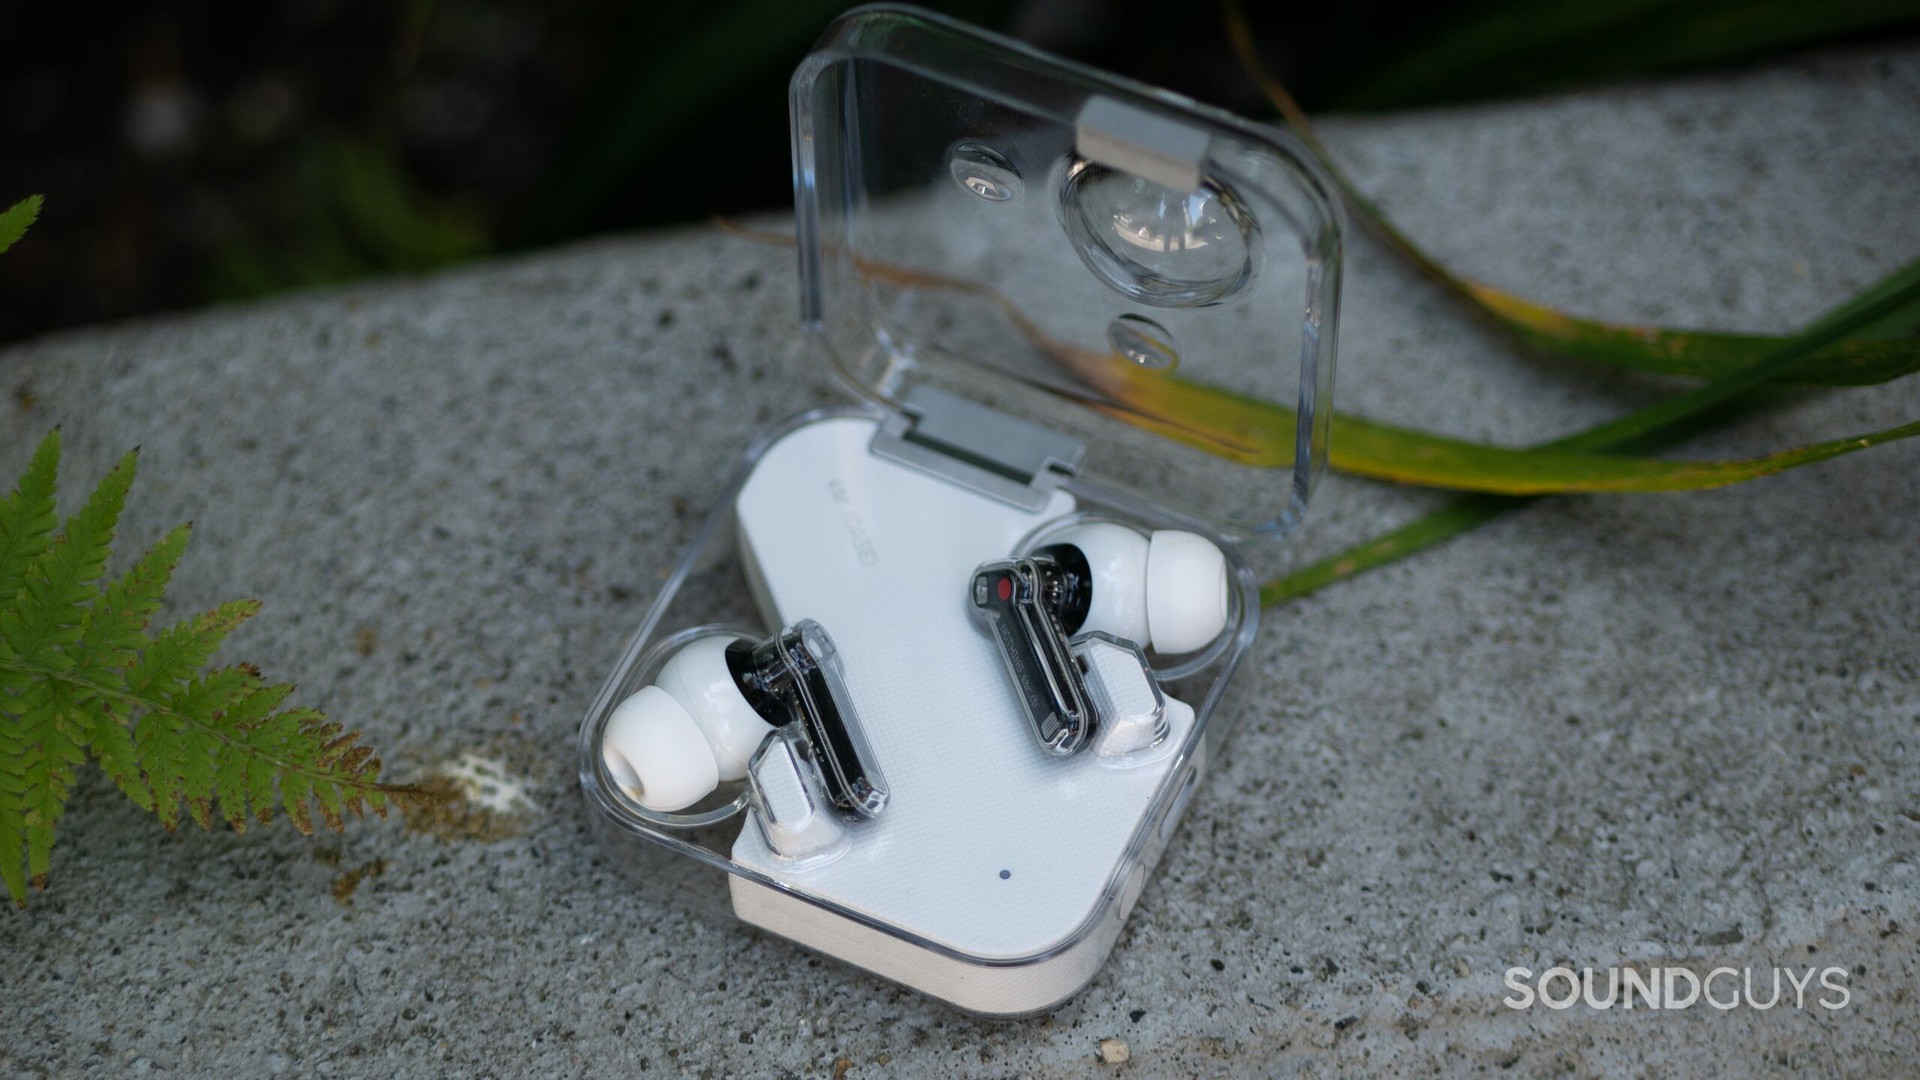 The Nothing Ear 1 lies on a concrete surface with the earbuds in the open case.